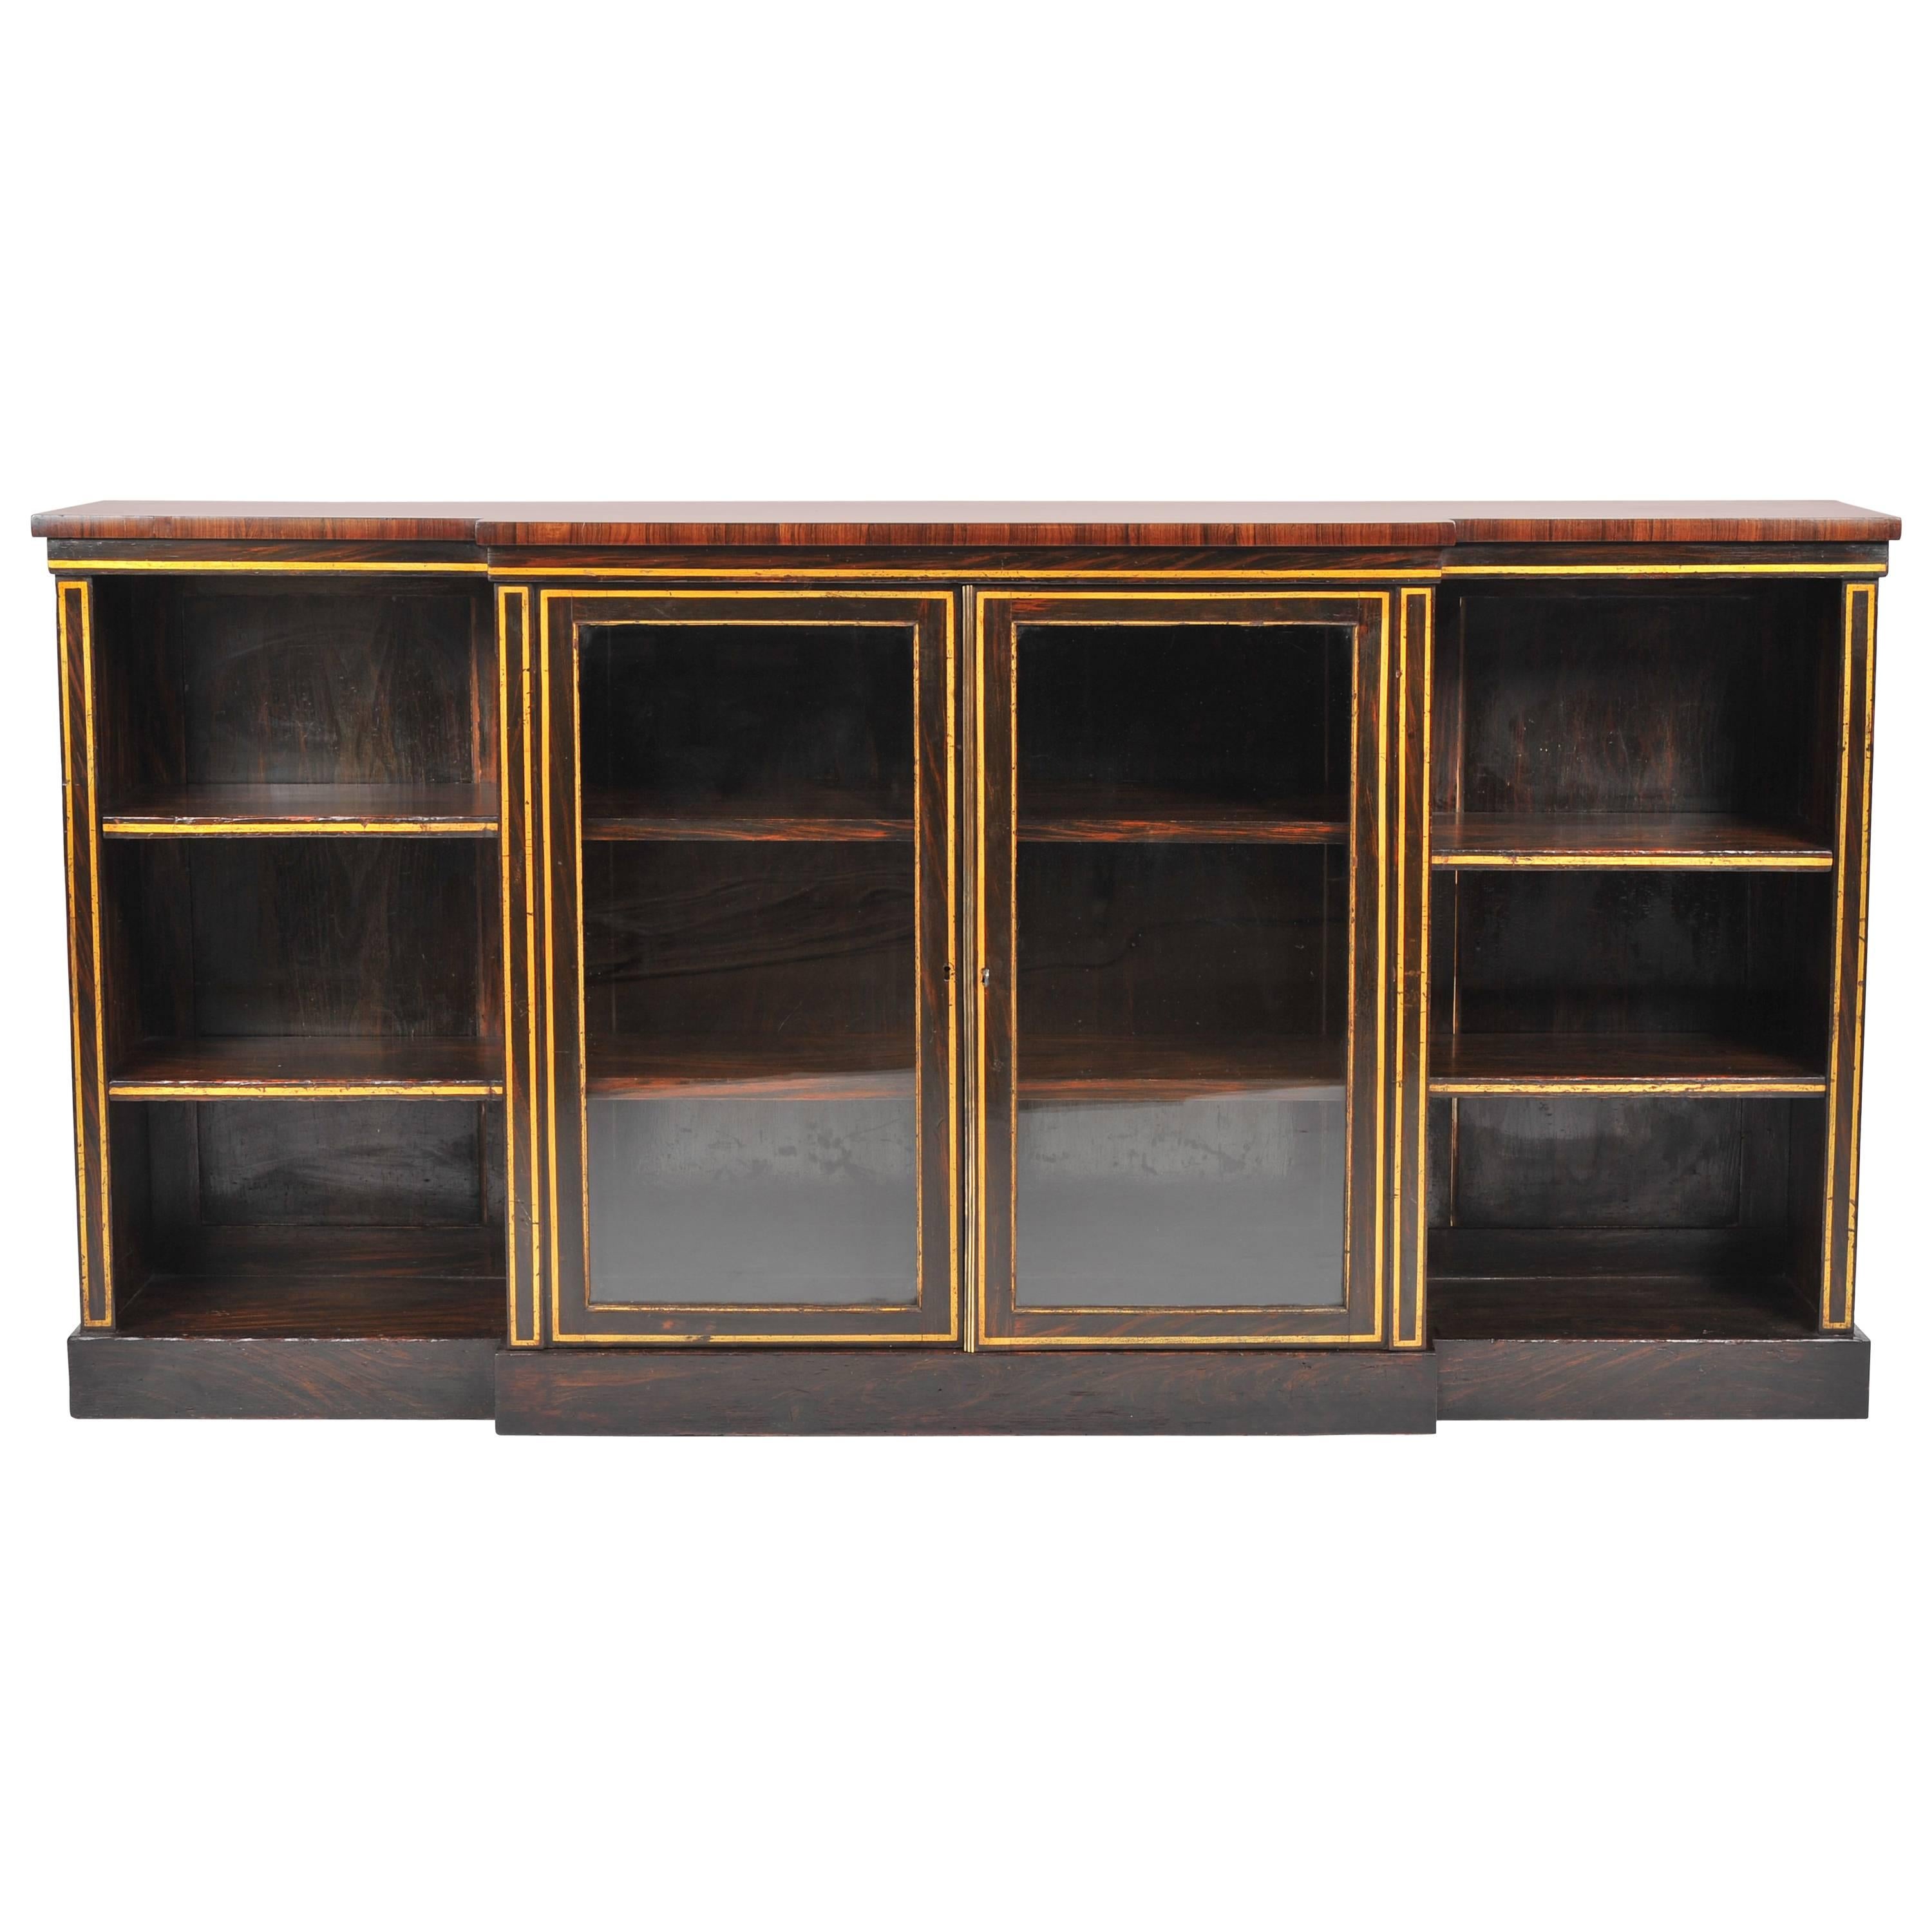 Regency Rosewood Breakfront Bookcase with Central Glass Doors